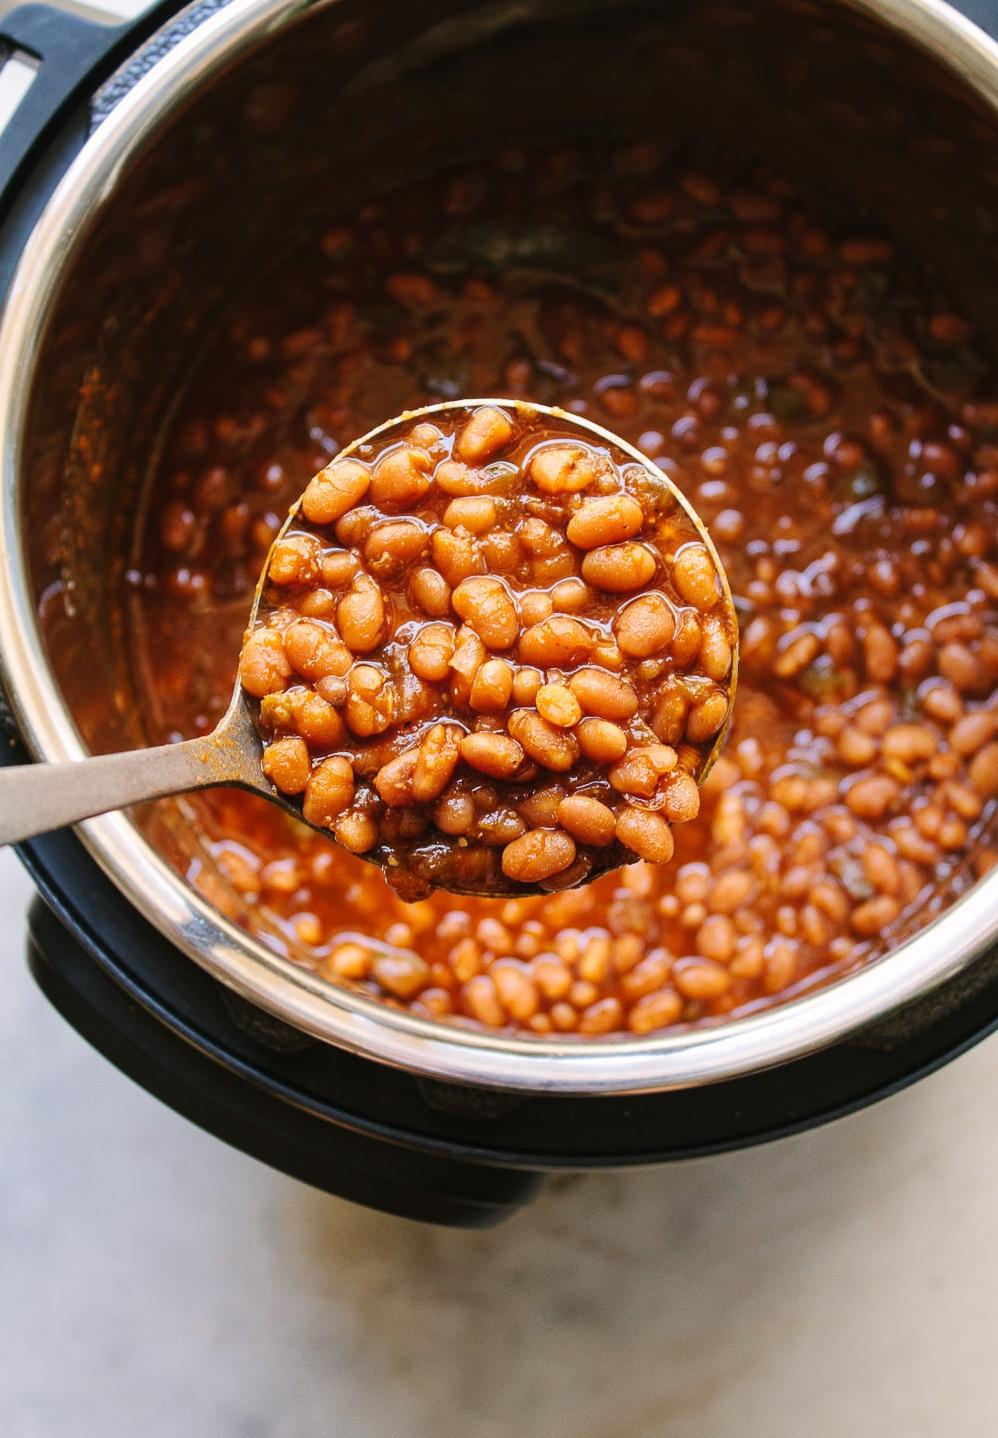  Healthy and hearty, these baked beans are the way to go.